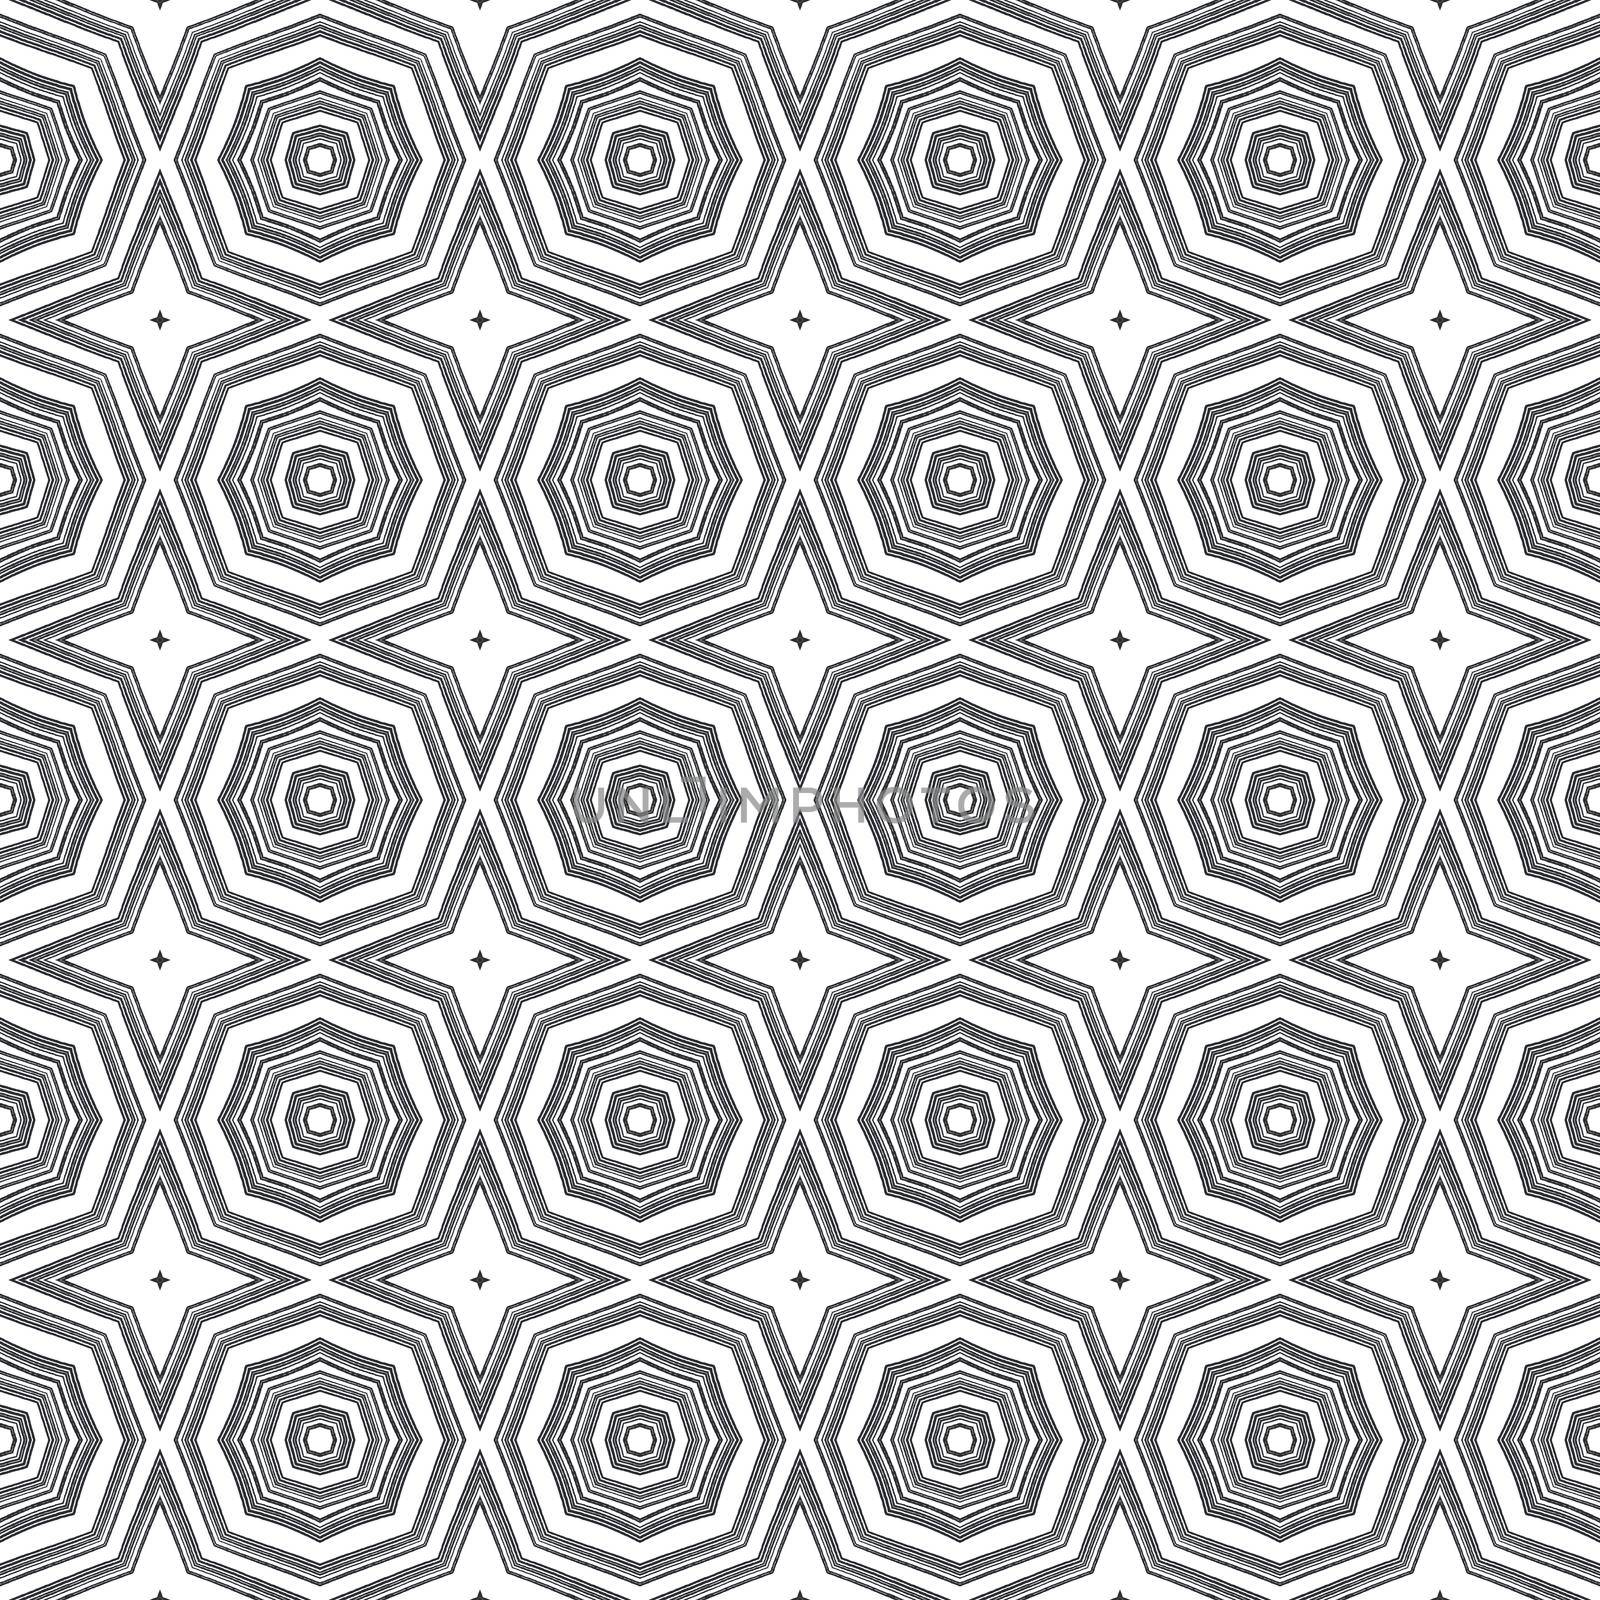 Tiled watercolor pattern. Black symmetrical kaleidoscope background. Hand painted tiled watercolor seamless. Textile ready divine print, swimwear fabric, wallpaper, wrapping.